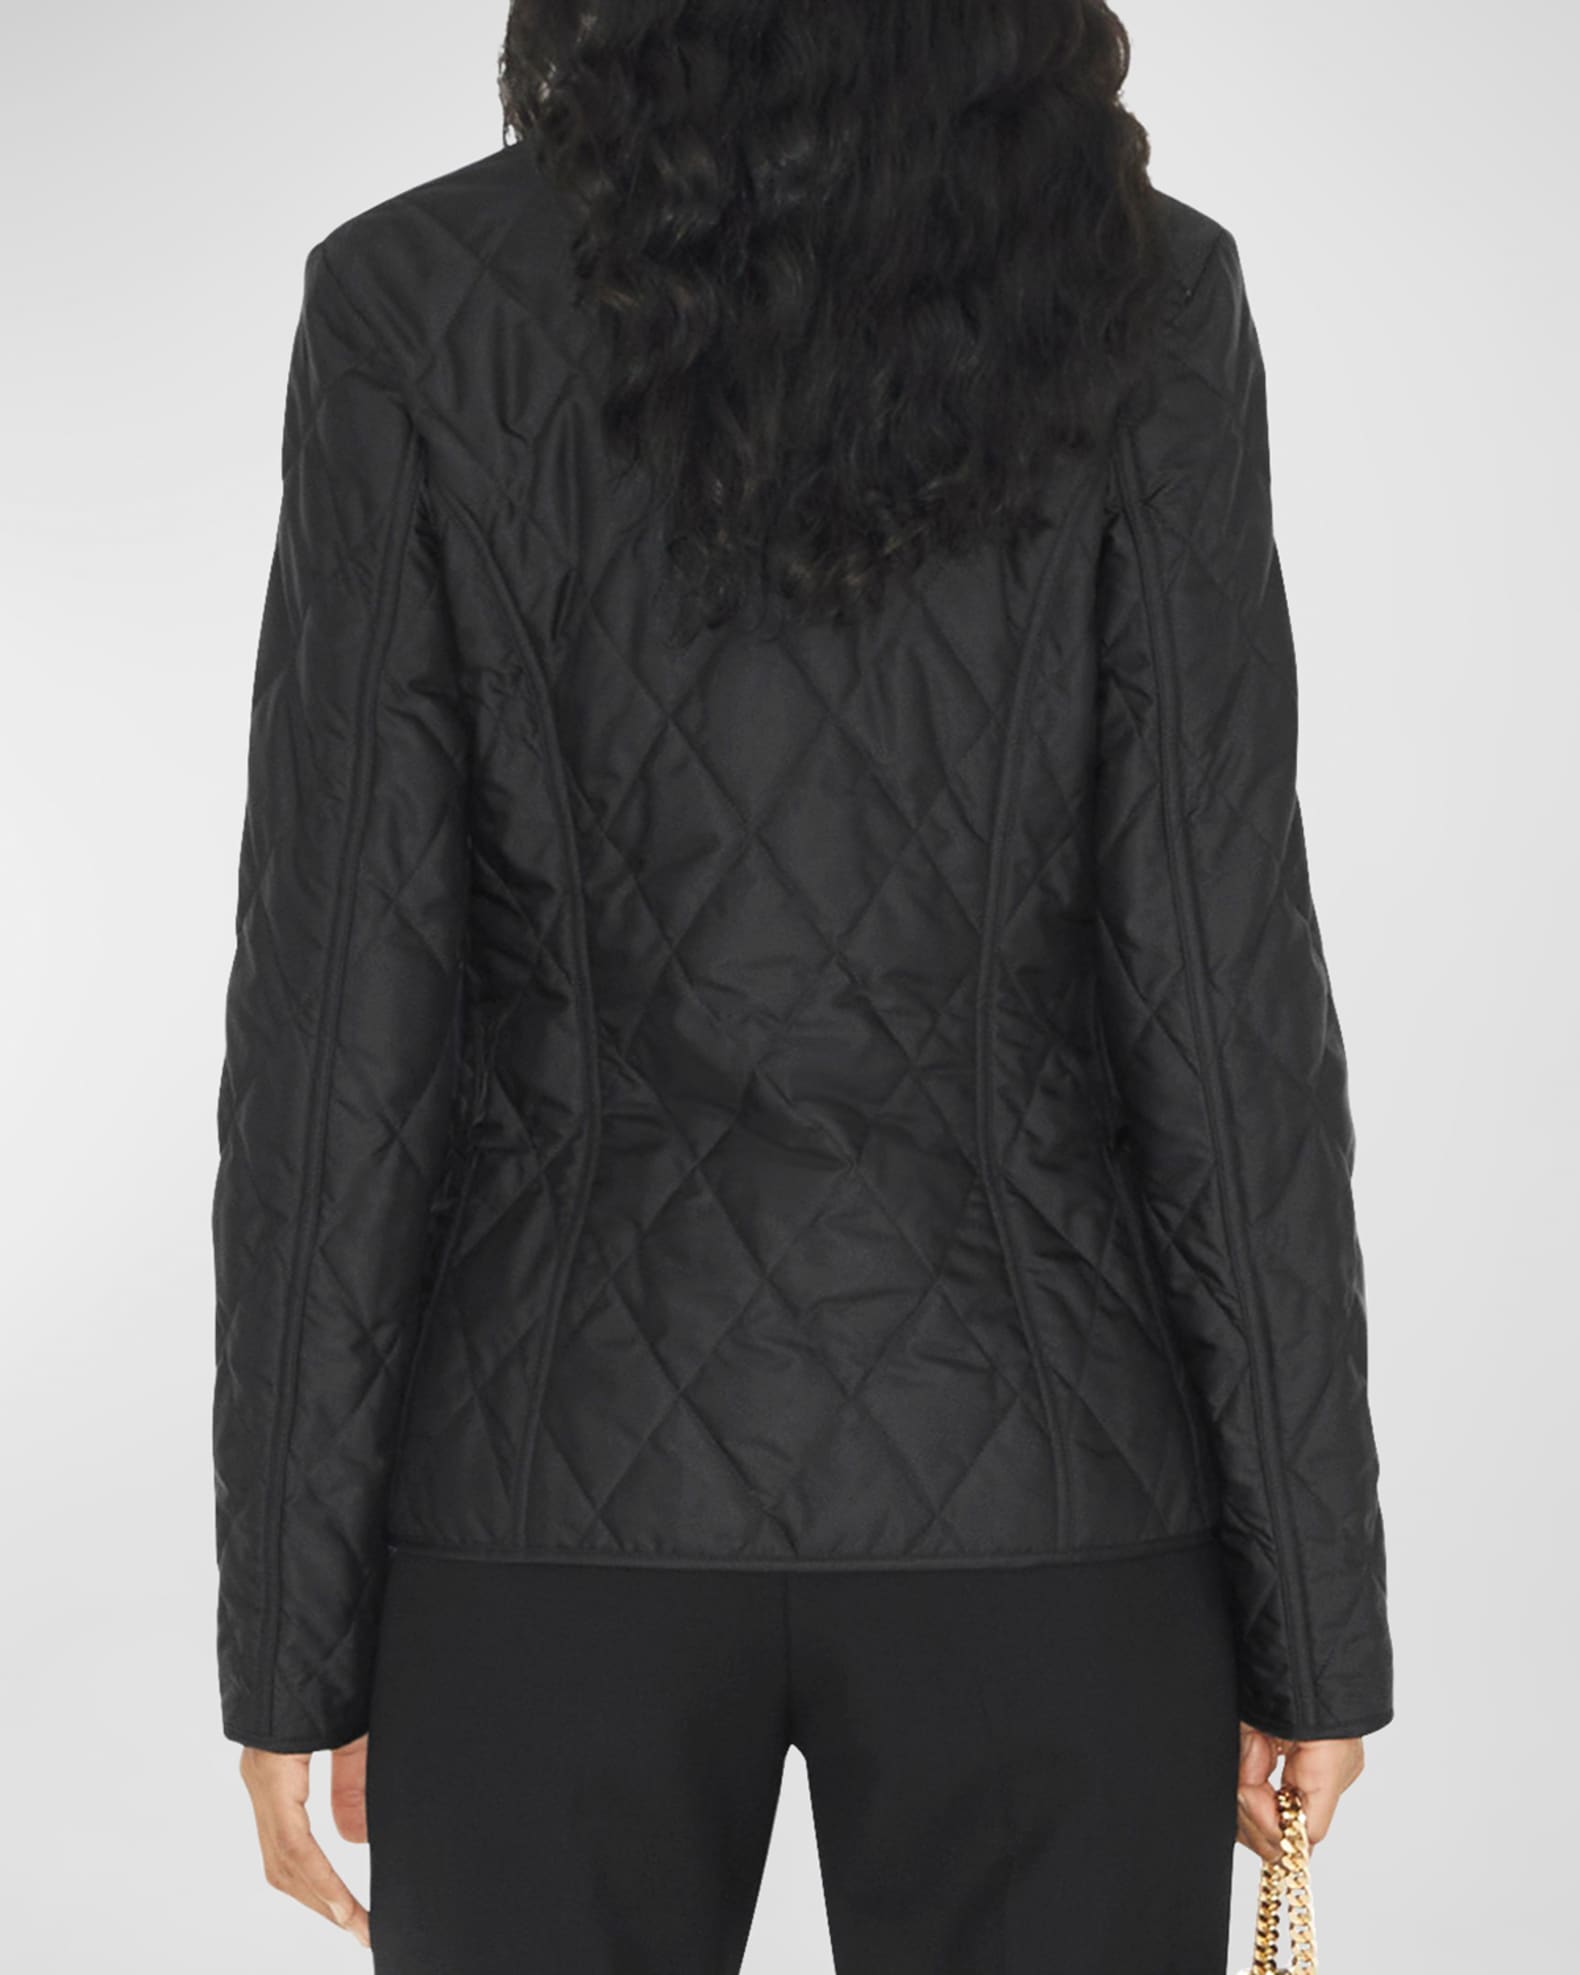 Burberry Black Quilted Coat